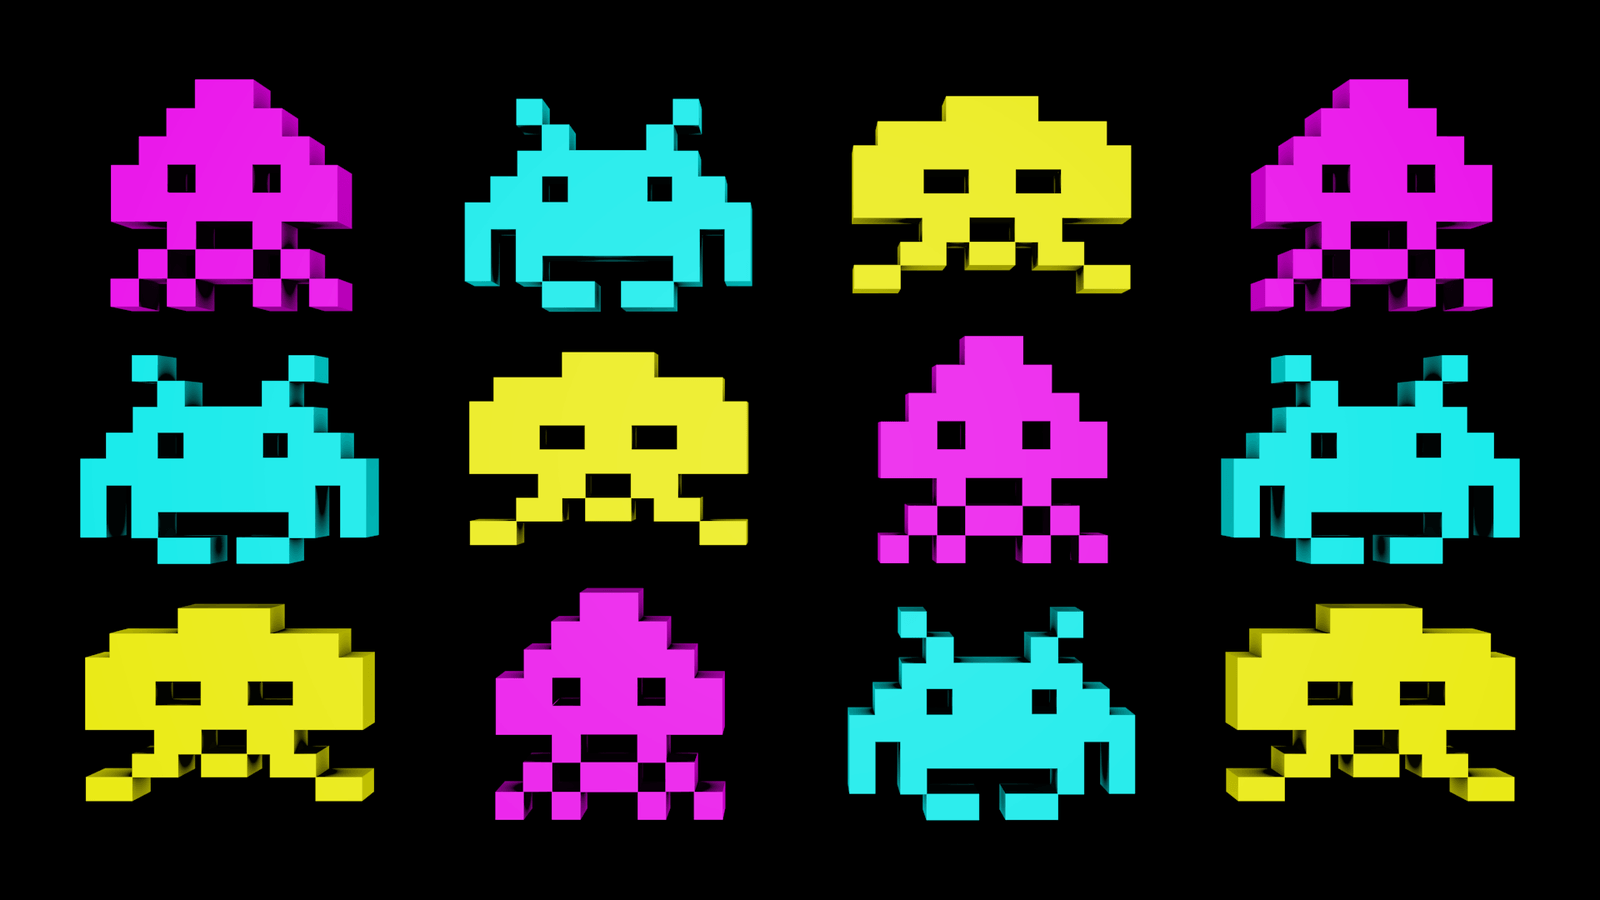 Space Invaders wallpapers 3 by TangoOscarMik3